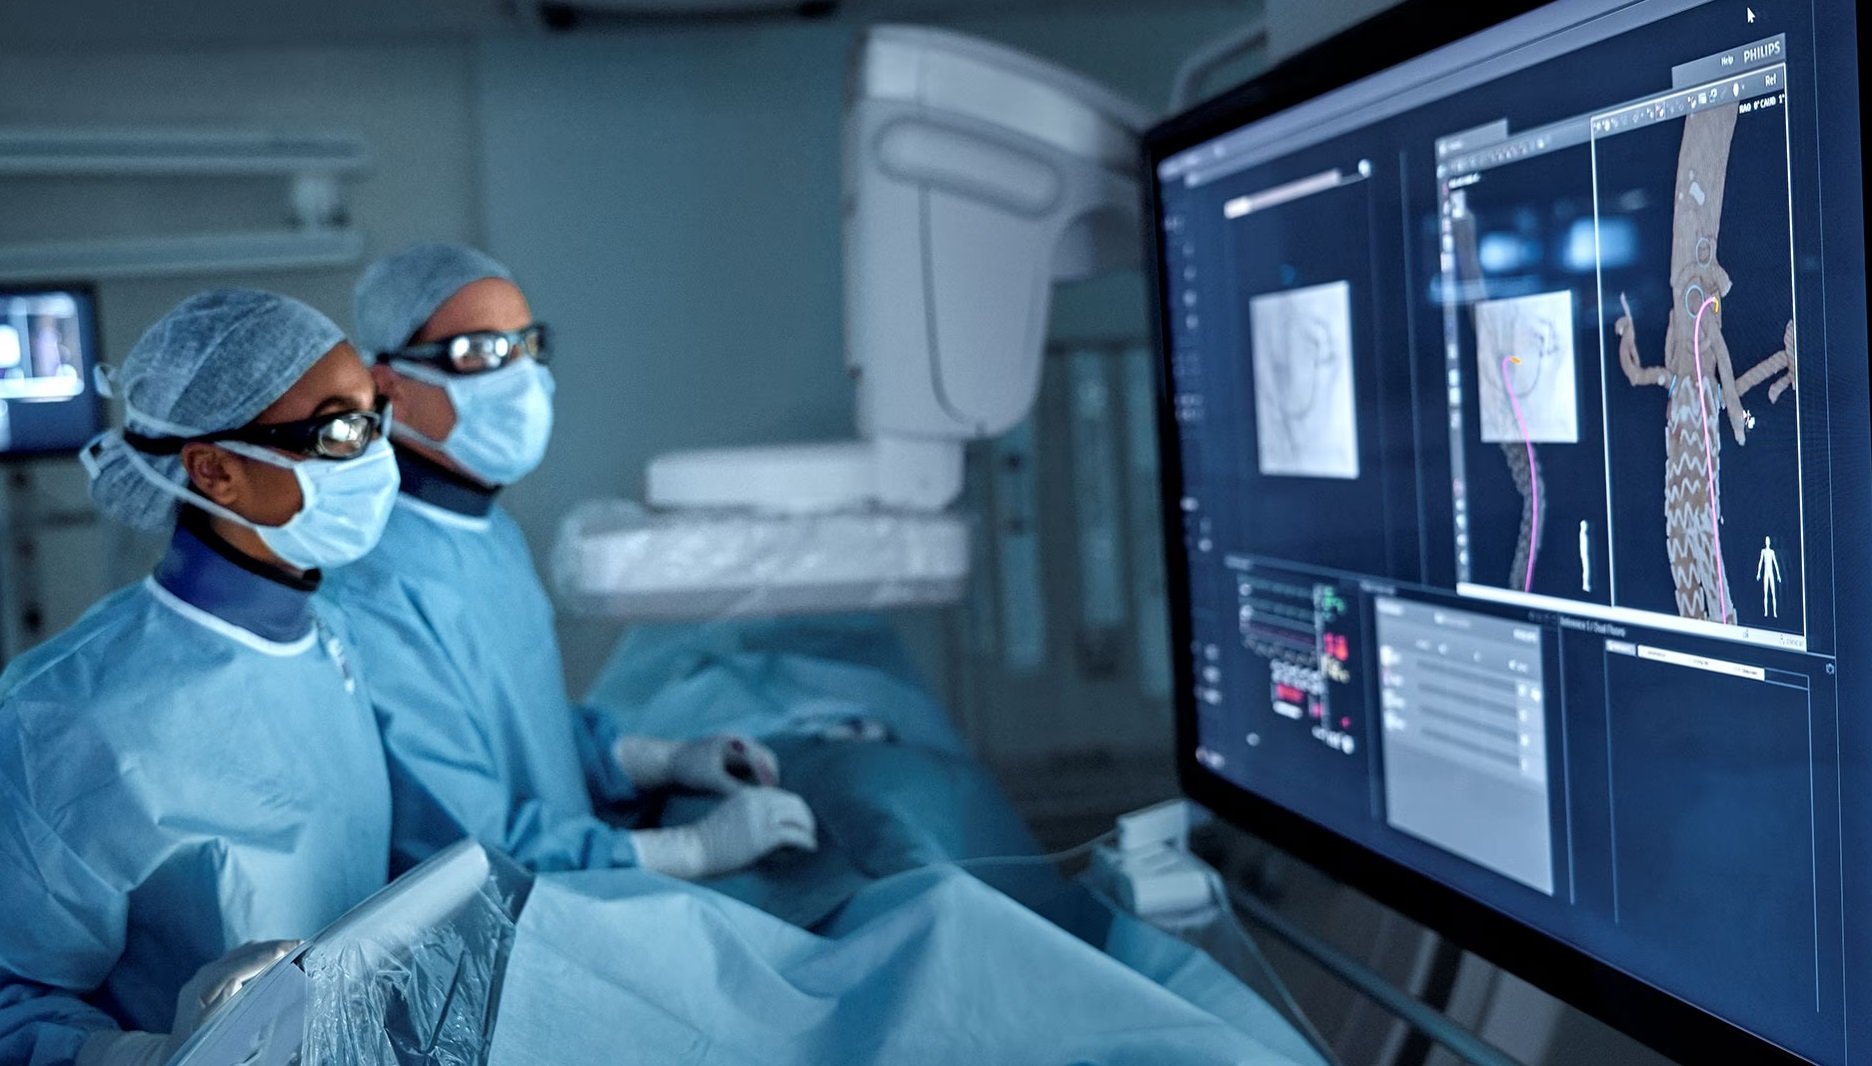 Surgeons using Philips LumiGlide system on monitor in operatin room